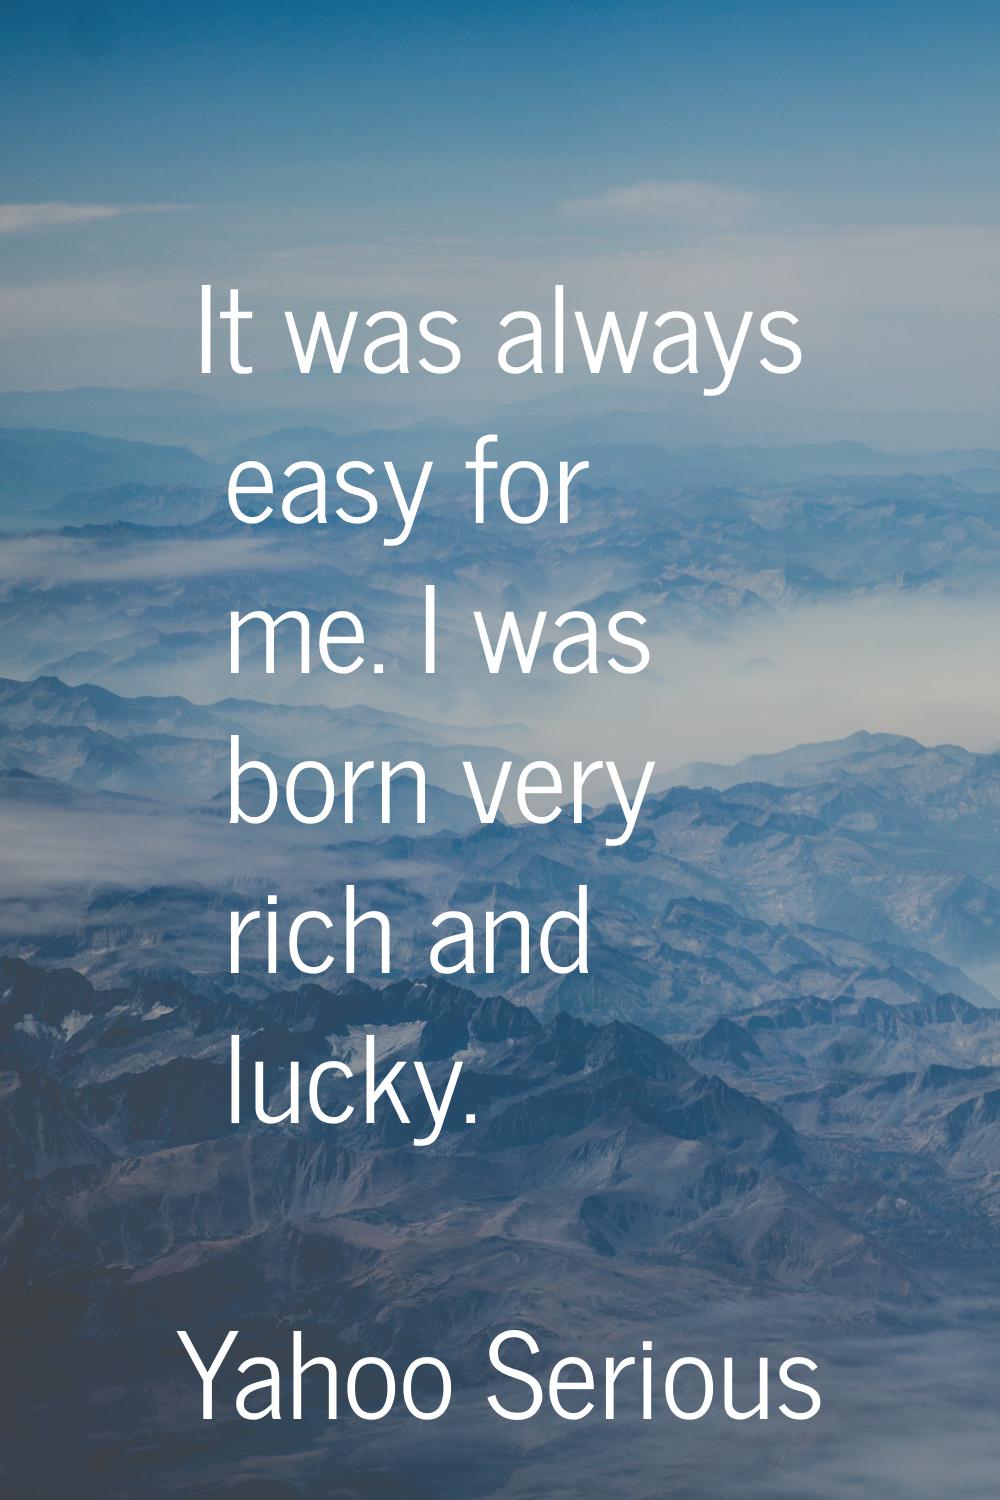 It was always easy for me. I was born very rich and lucky.